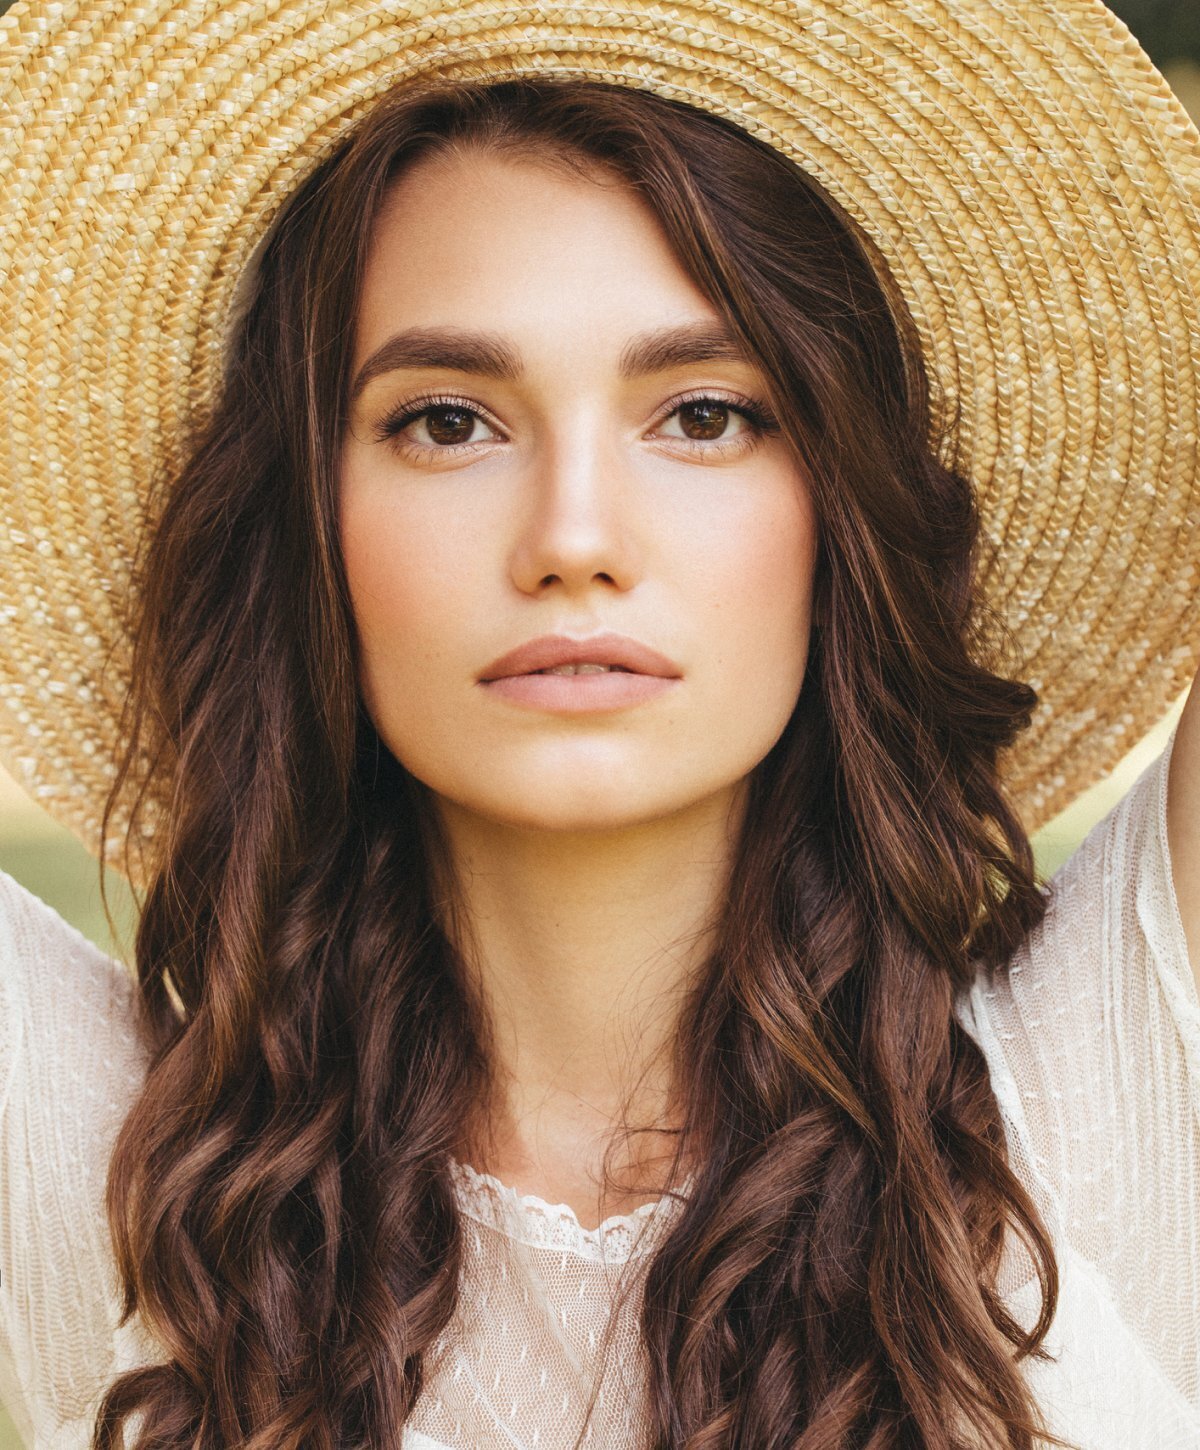 Grand Rapids skinvive patient model with brown hair wearing a large sun hat